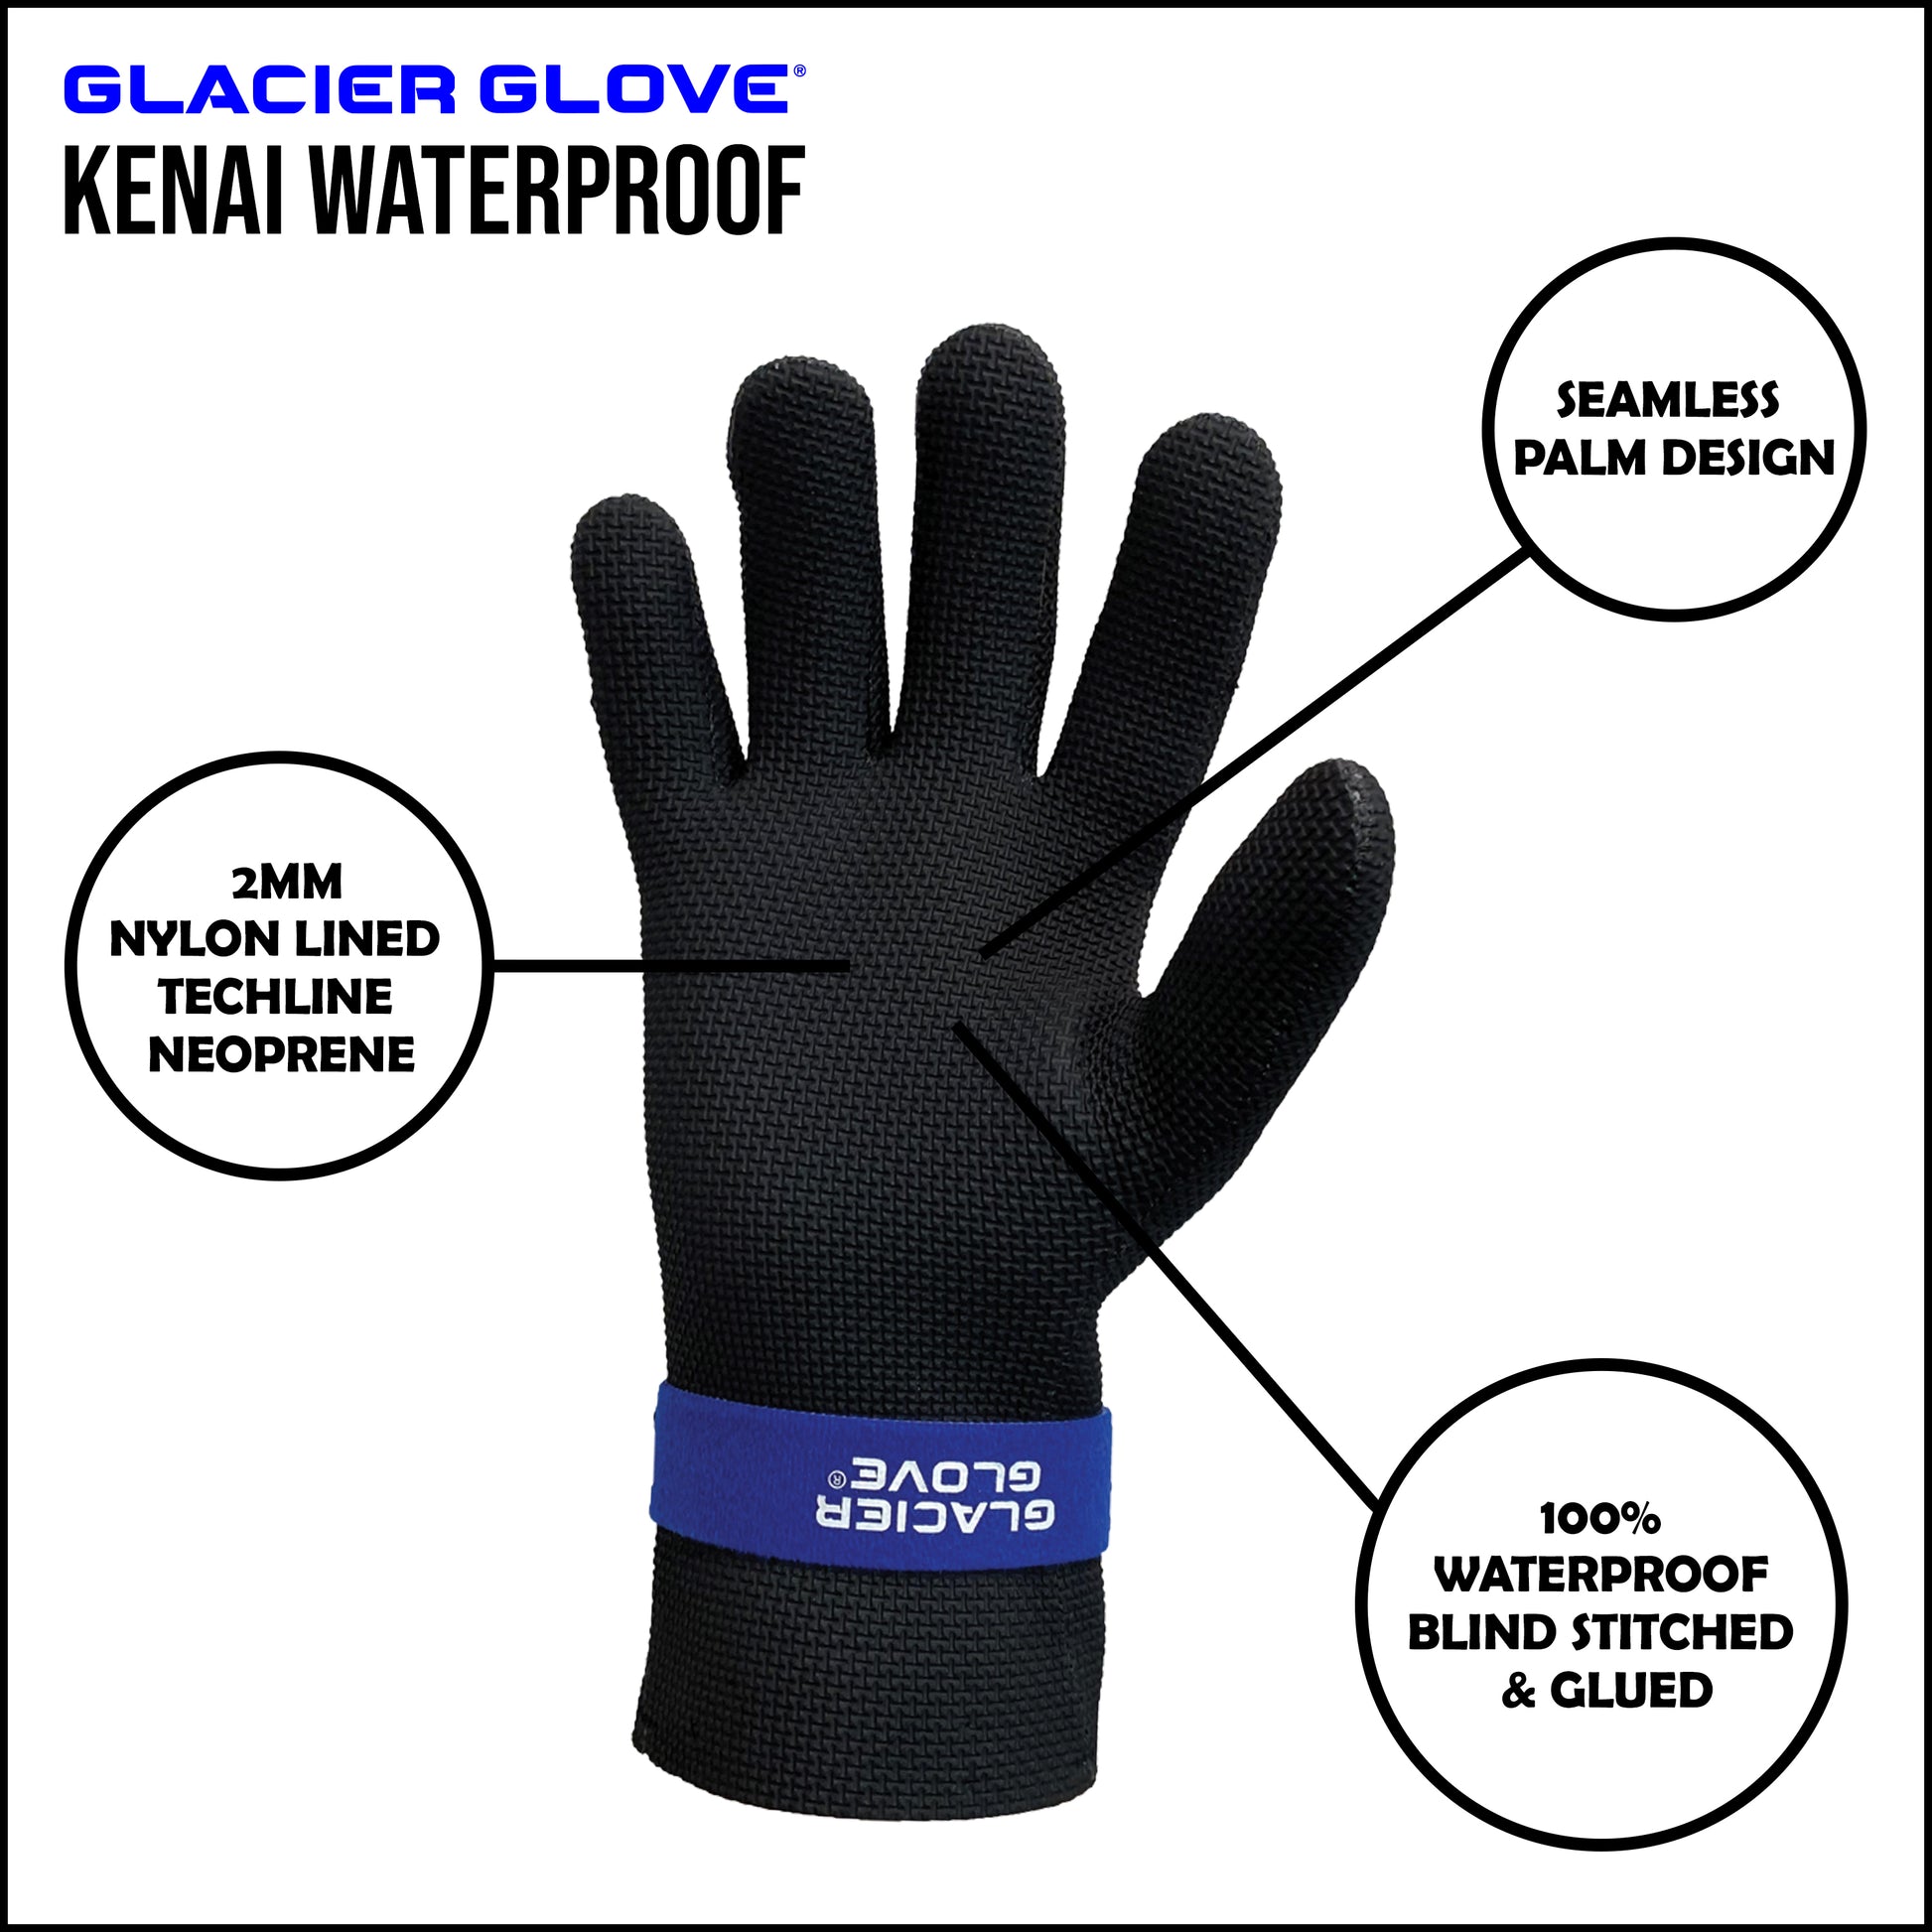 The Kenai Waterproof is built to be your favorite glove. Its durability and functionality combined with warmth and comfort makes this glove the perfect choice for cold, wet conditions.